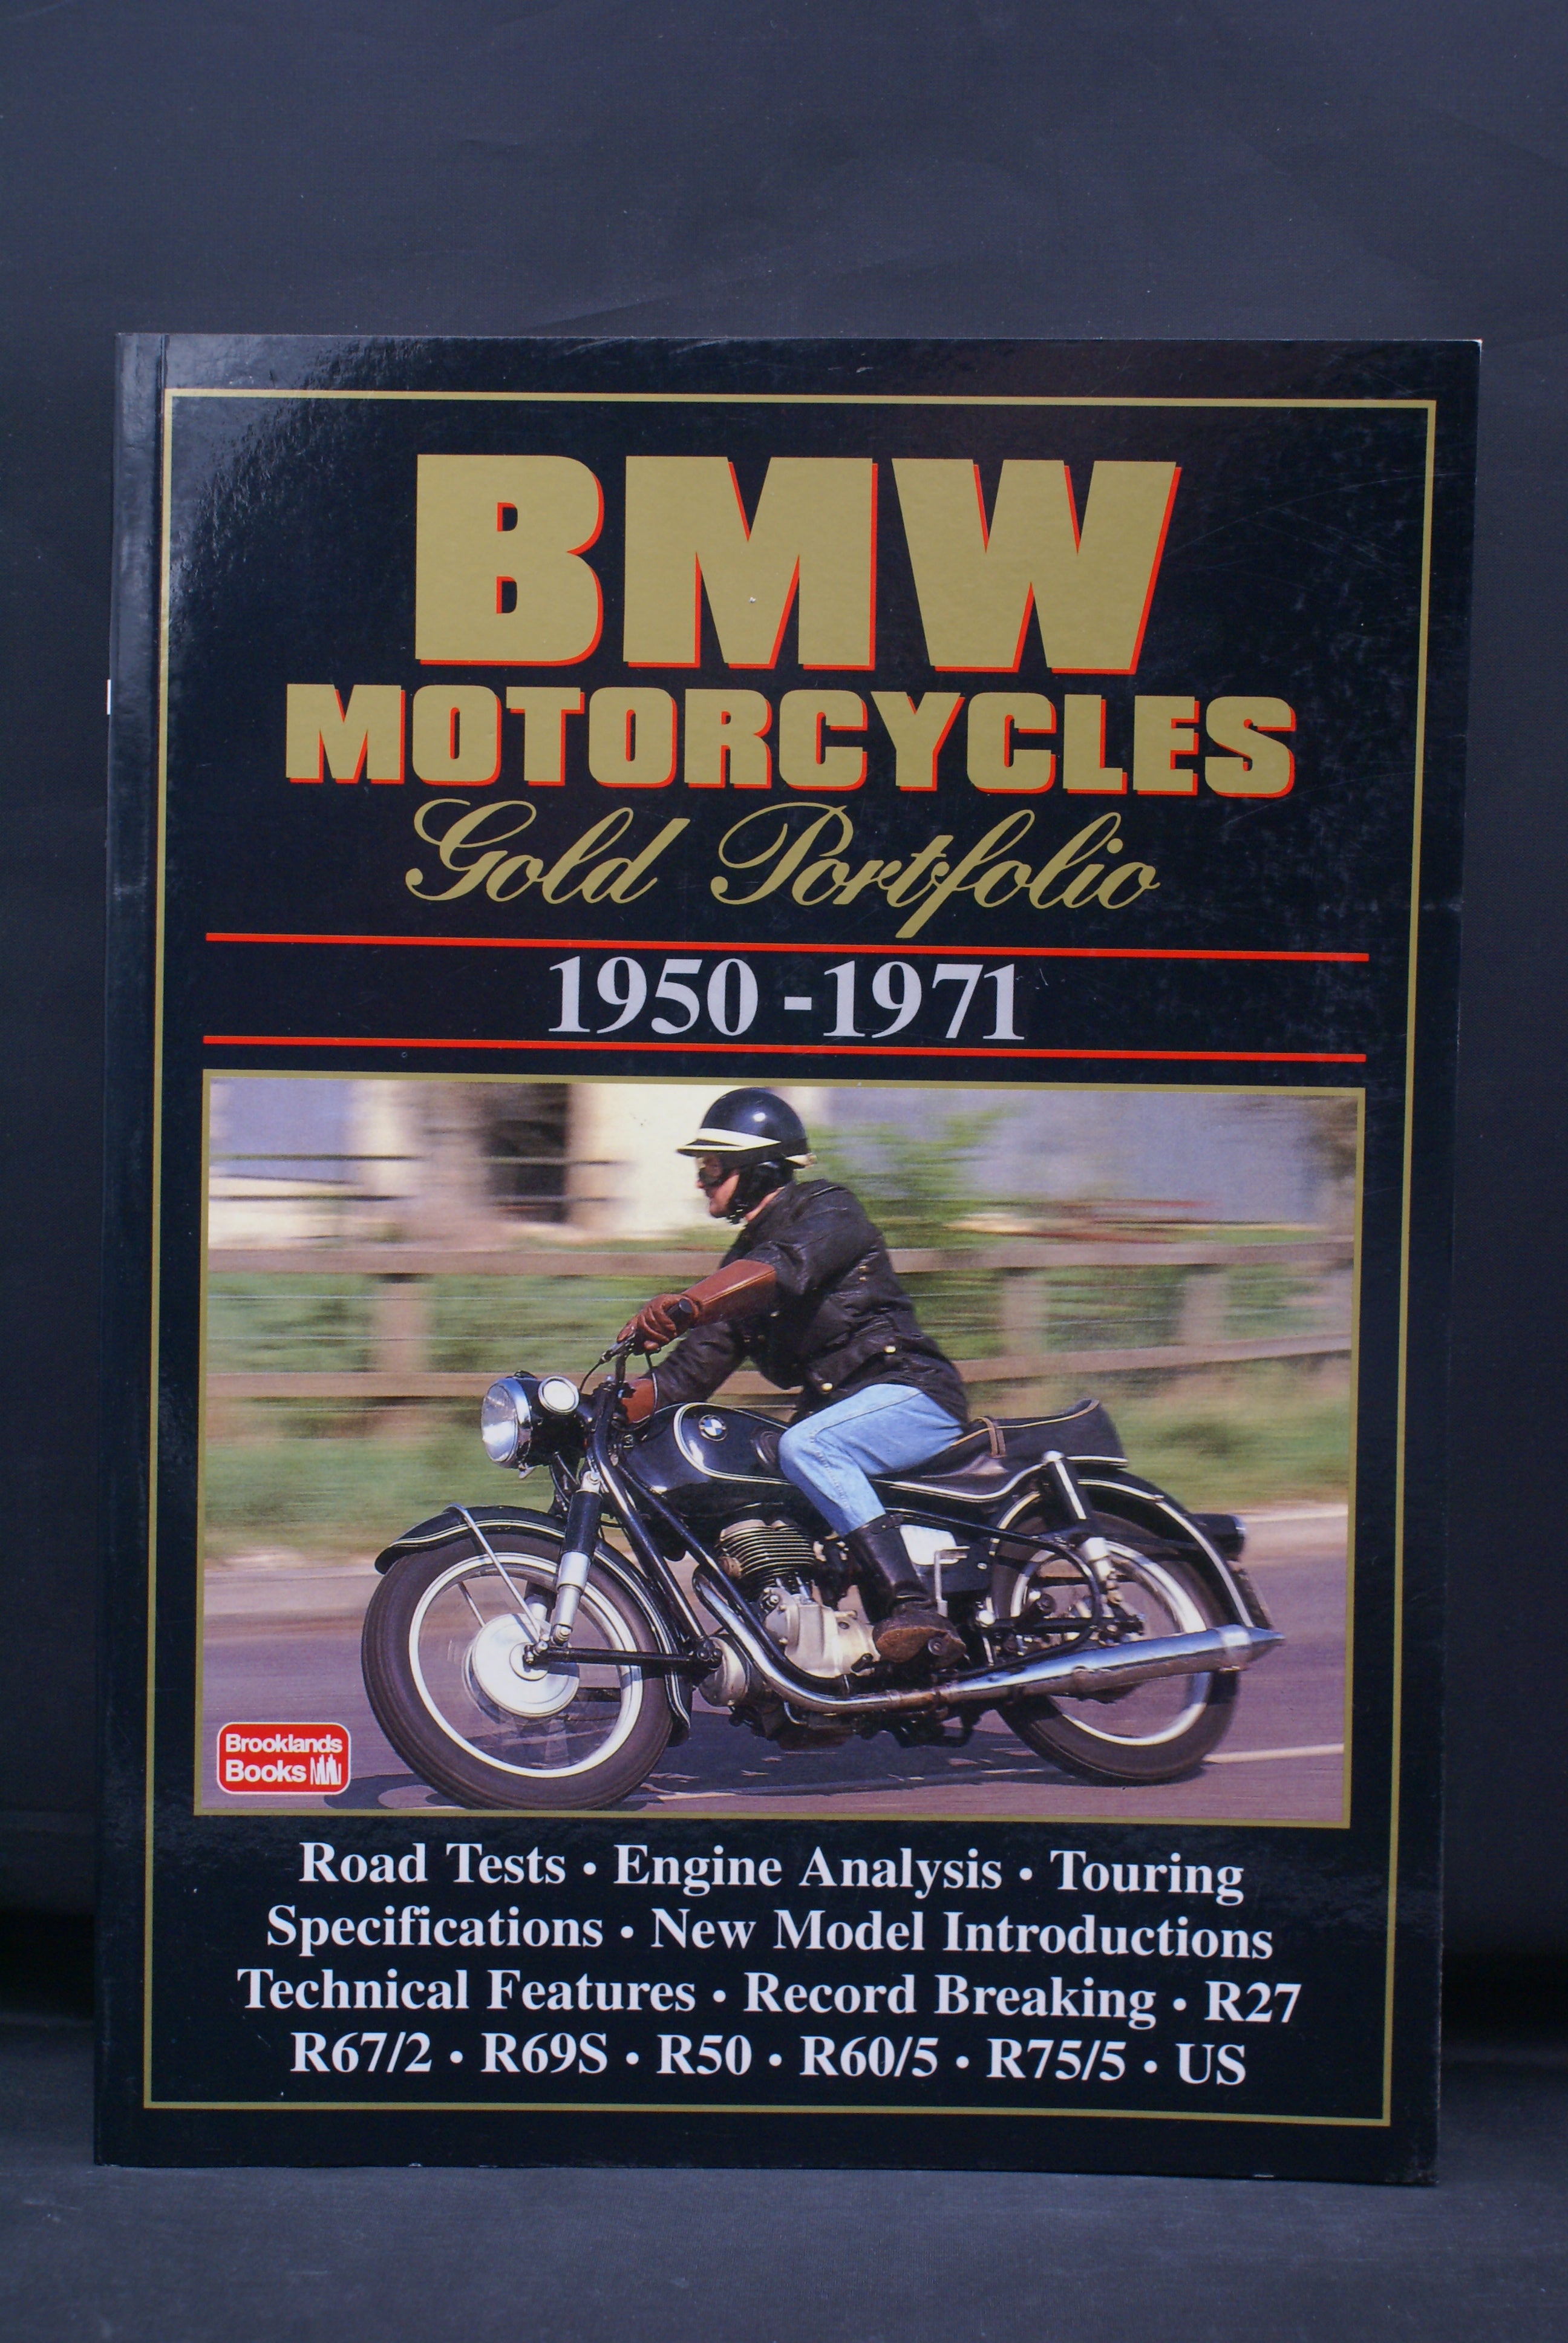 BMW Motorcycles 1950-1971